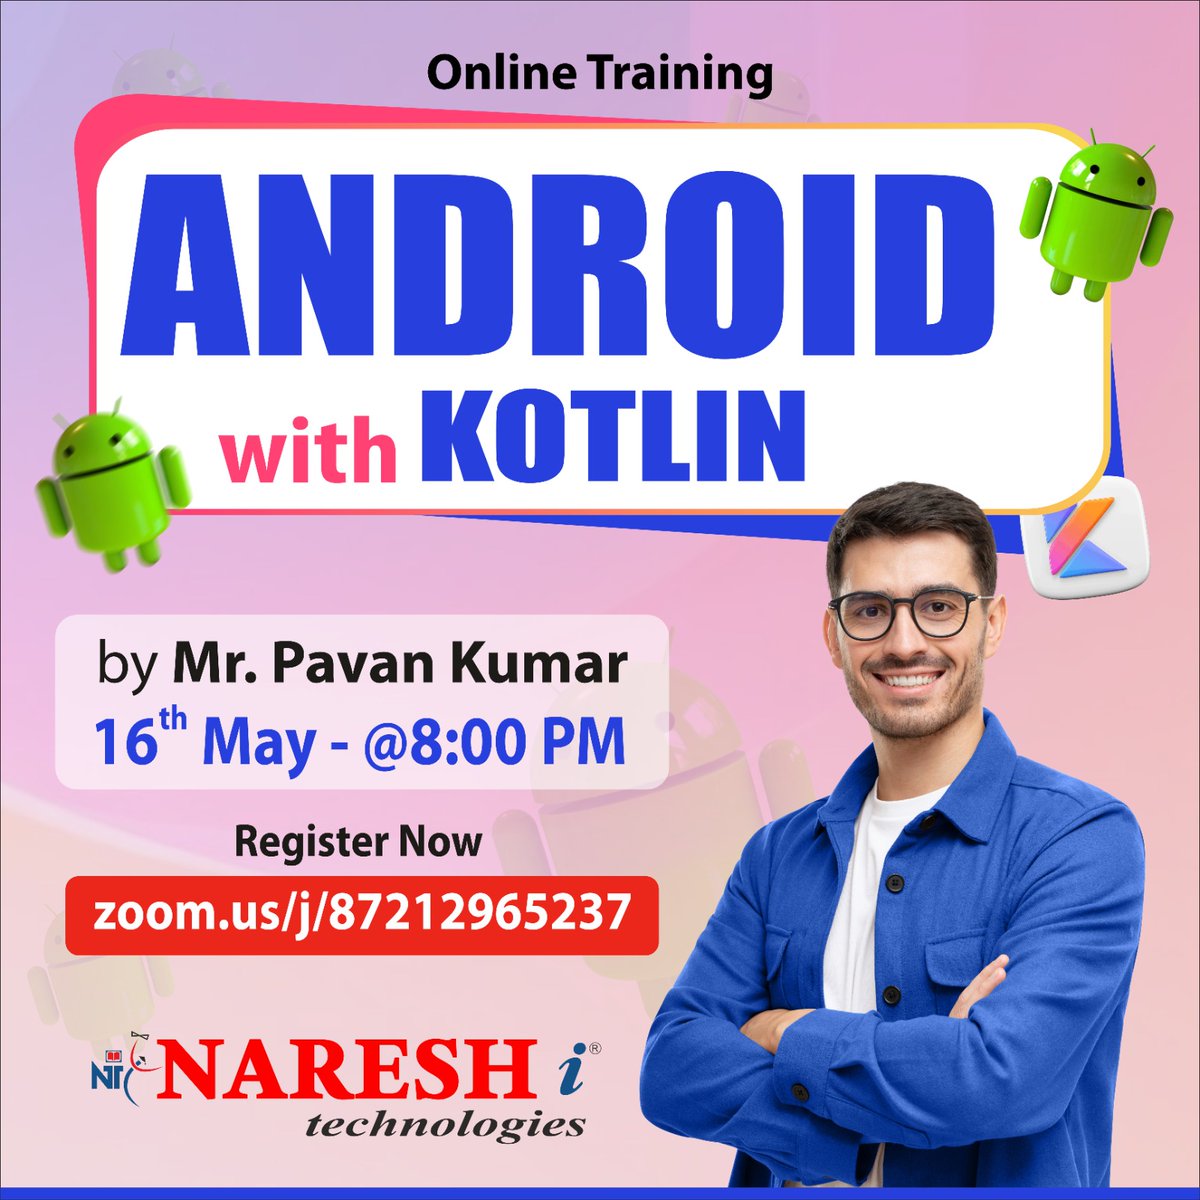 ✍️Enroll Now: bit.ly/44CexYA
👉Attend Free Demo On Android by Mr. Pavan Kumar.
📅Demo On: 16th May @ 8:00 PM (IST)

#Android #kotlin #androiddevelopmenttraining #androidkotlin #AndroidStudio #kotlinforandroid #MobileAppDevelopment #nareshit #nareshitjobs #career